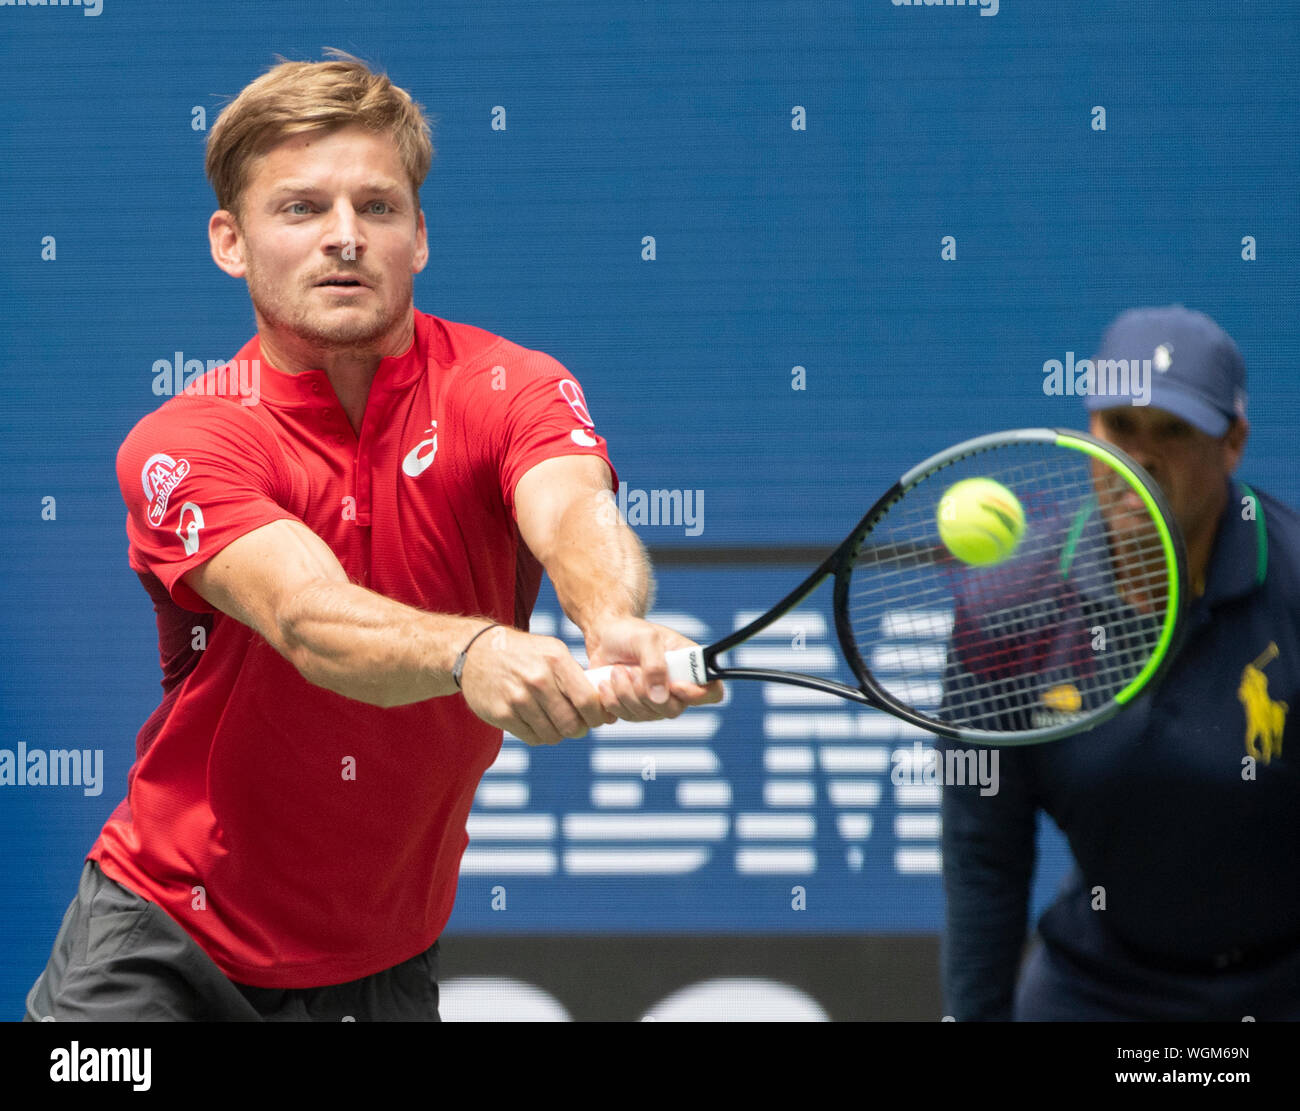 Flushing, Queens, NY, USA. 1st Sep, 2019. David Goffin (BEL) loses to Roger Federer (SUI) 6-2, 6-2, 6-0, at the US Open being played at Billie Jean King National Tennis Center in Flushing, Queens, NY. © Jo Becktold/CSM/Alamy Live News Stock Photo